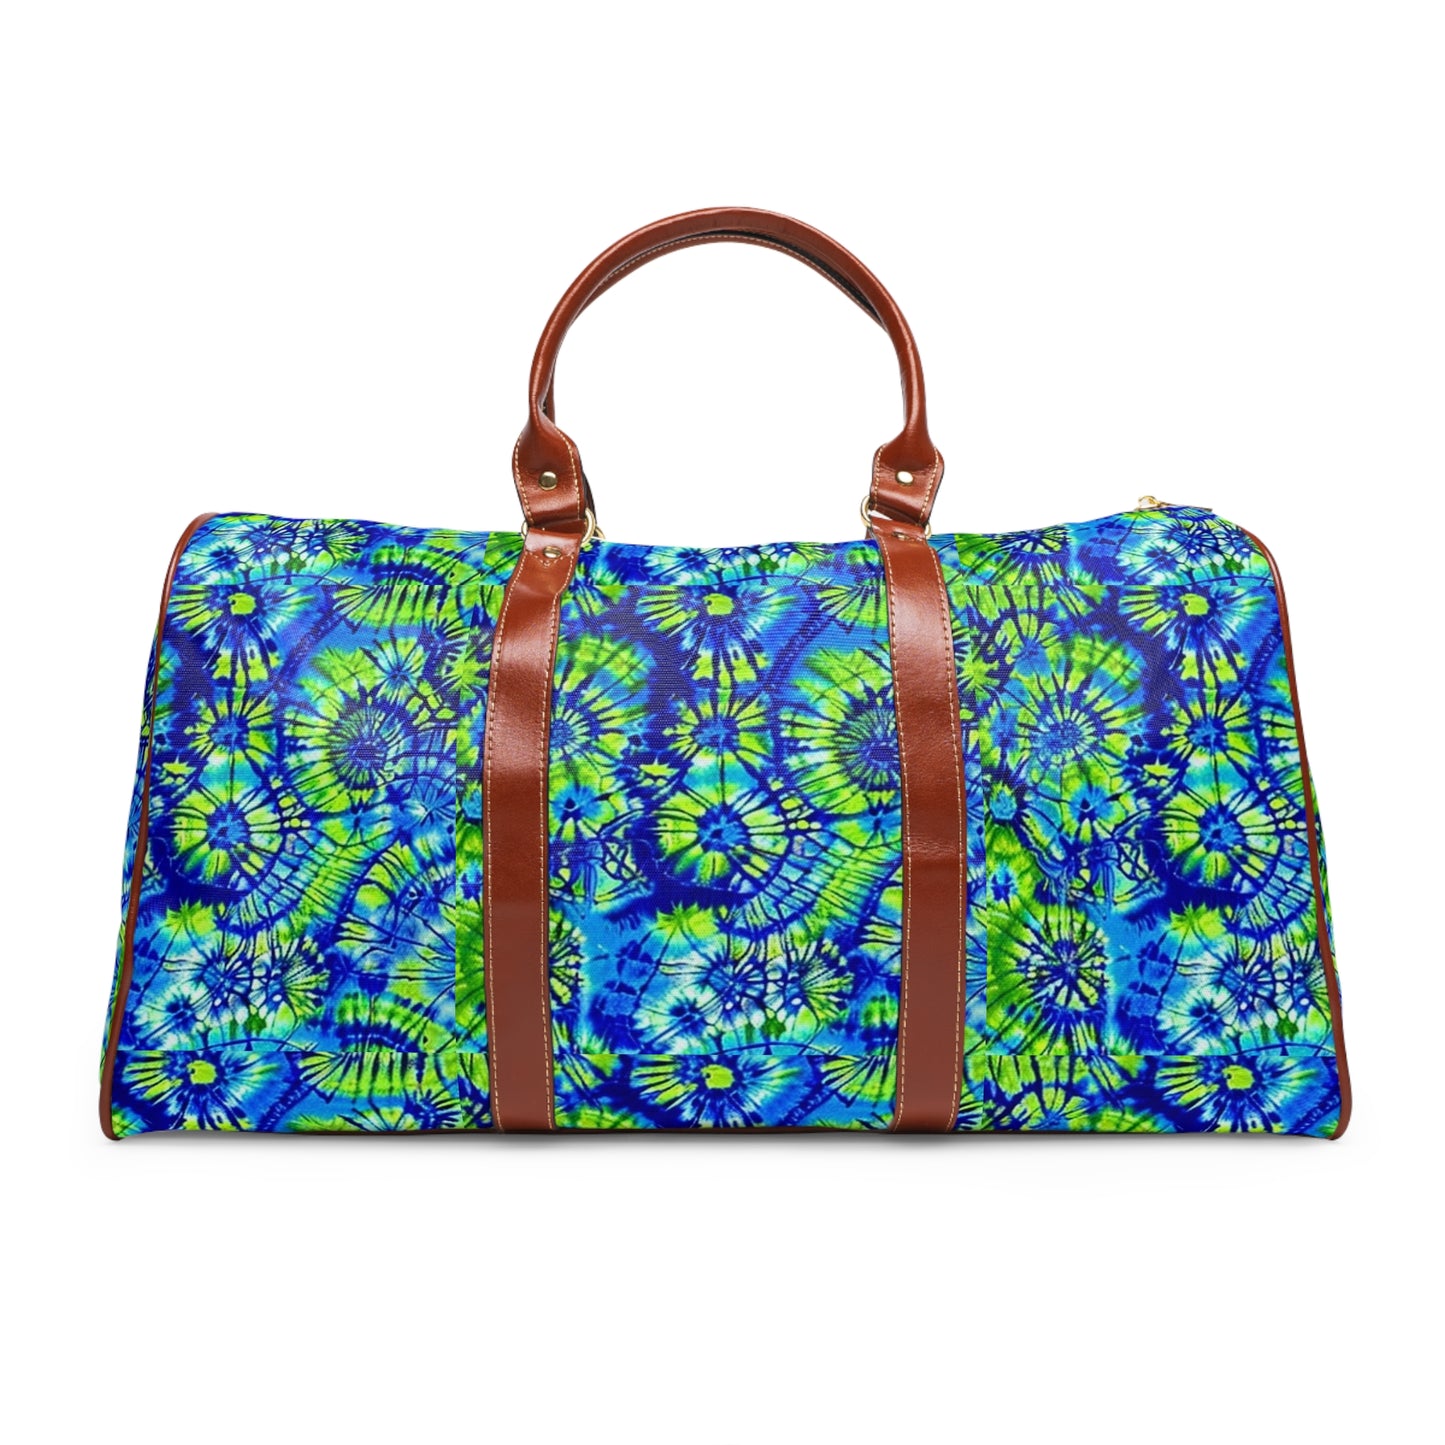 Tie-Dye Beach Turquoise and Lime Green Pattern Vacation Waterproof Travel Bag